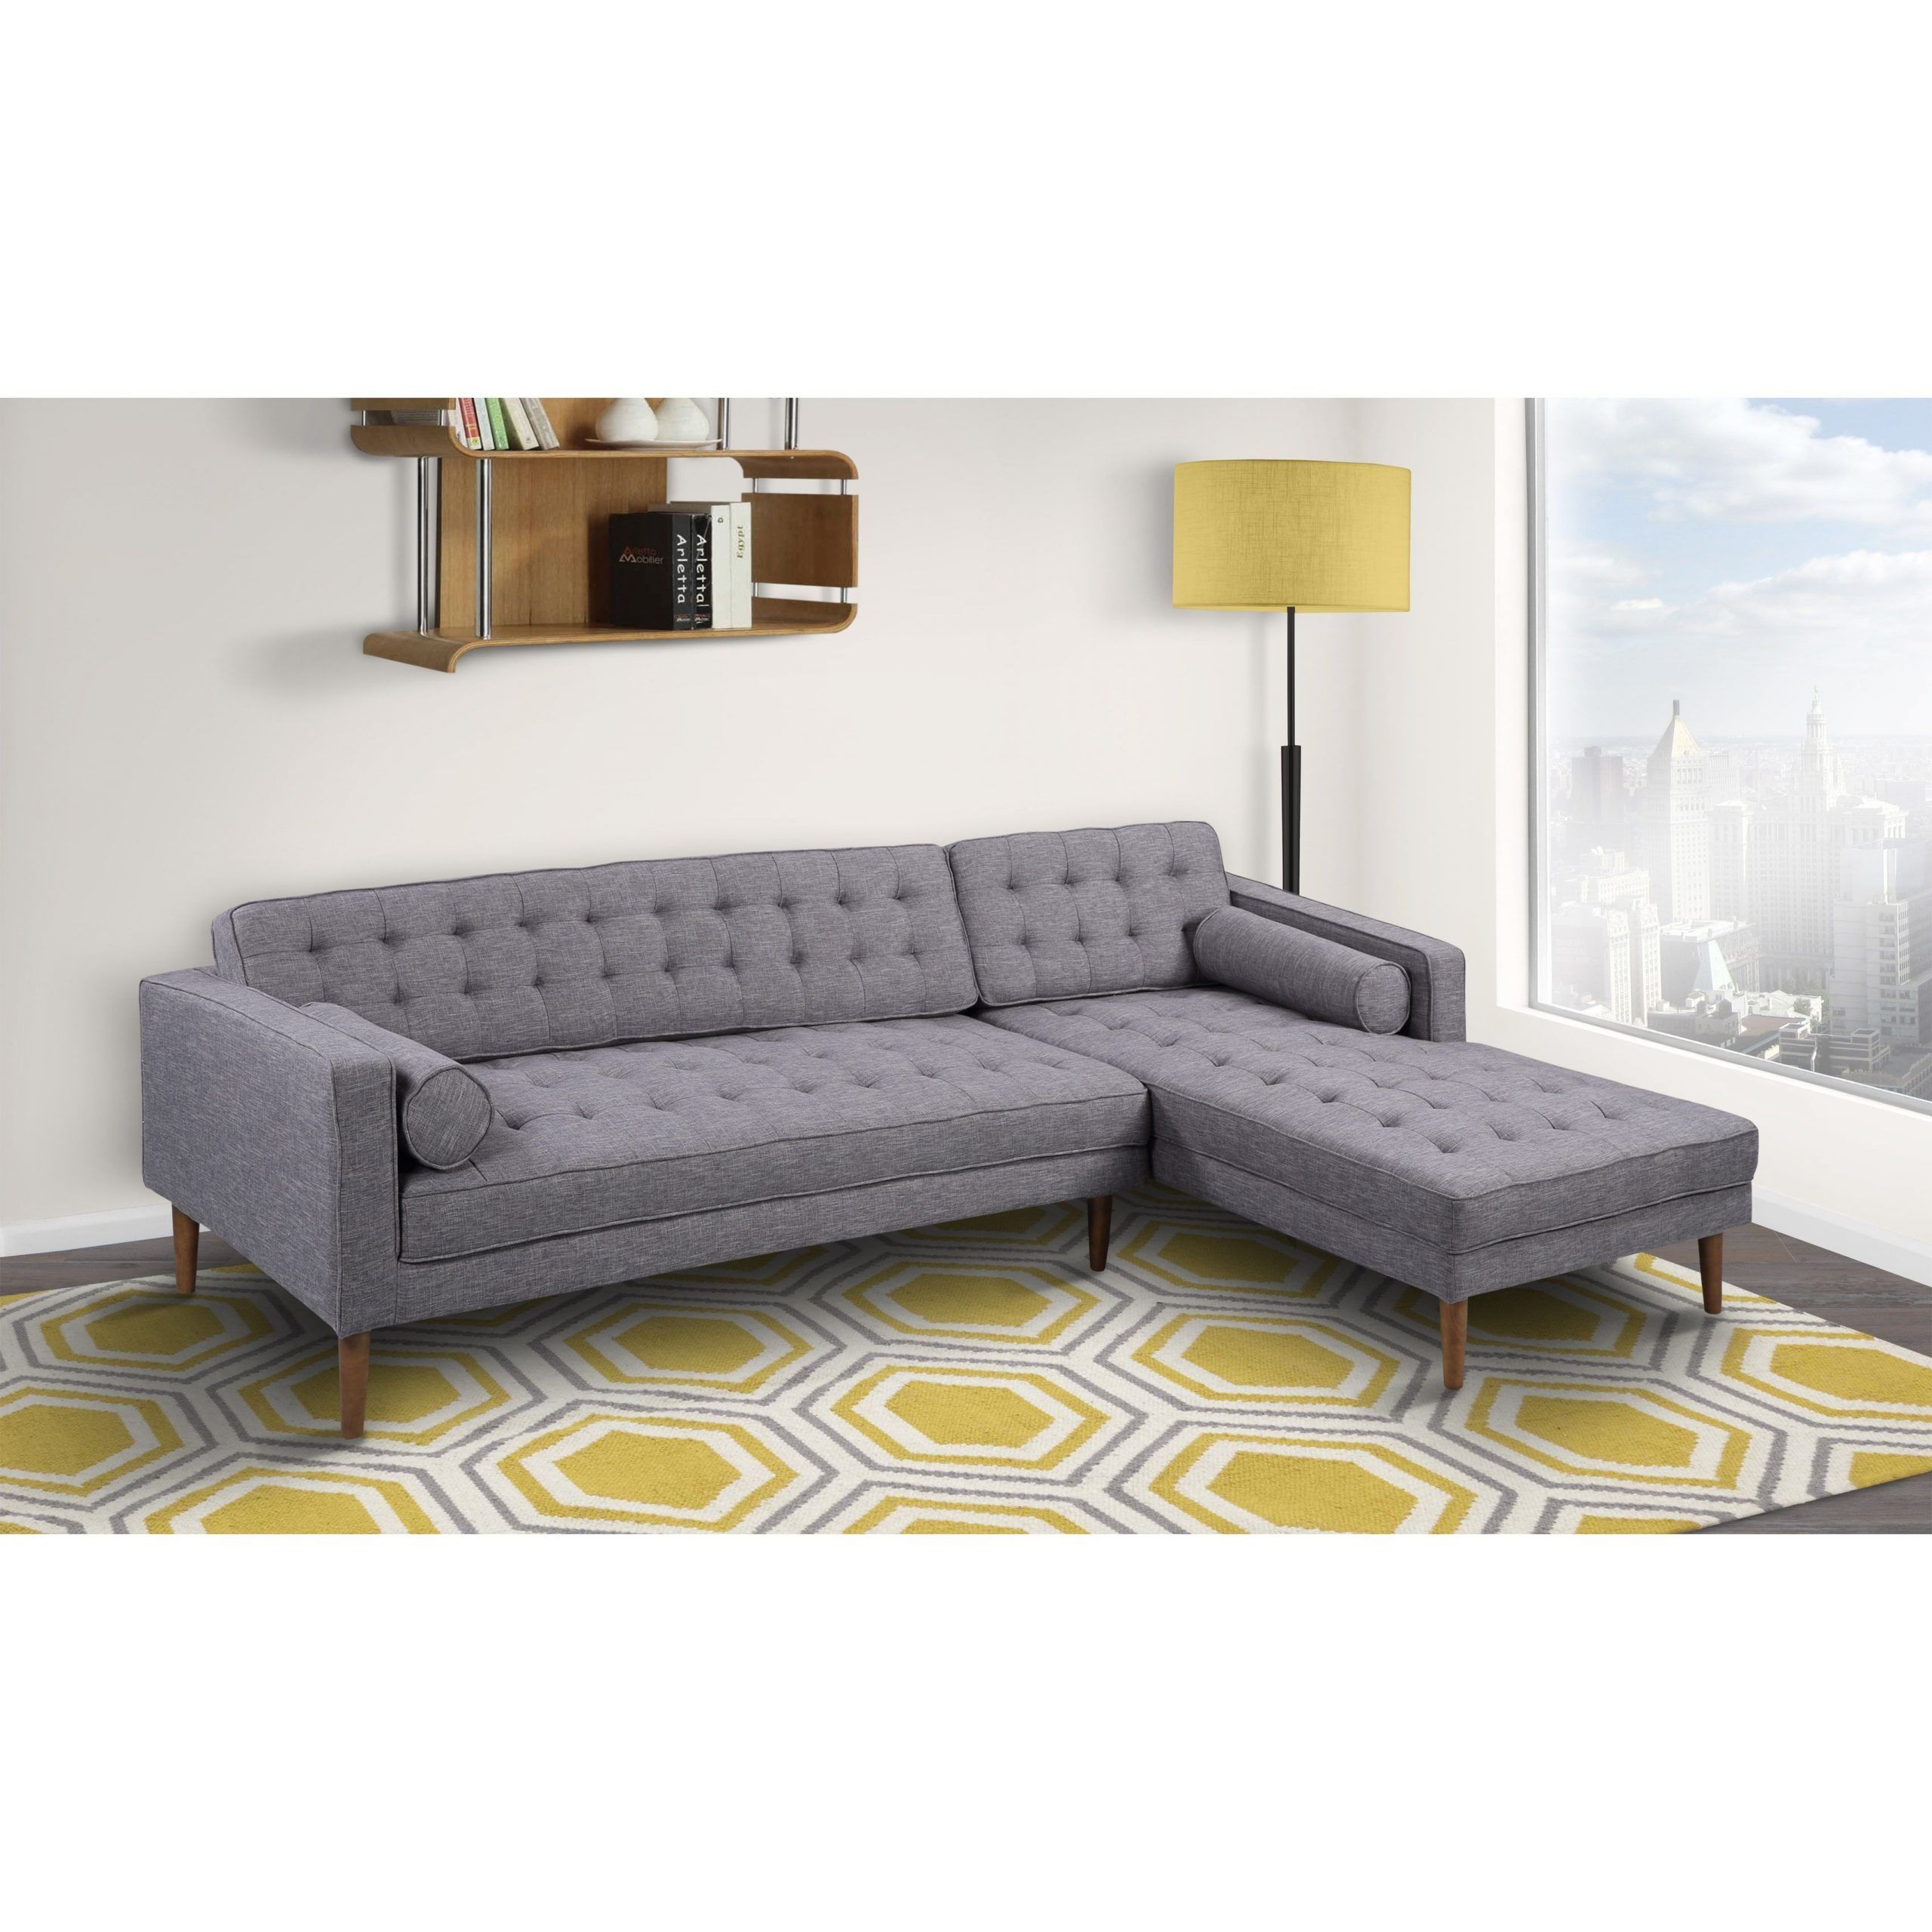 Armen Living Element Tufted Dark Grey Linen Sectional Sofa Inside Element Right Side Chaise Sectional Sofas In Dark Gray Linen And Walnut Legs (View 7 of 15)